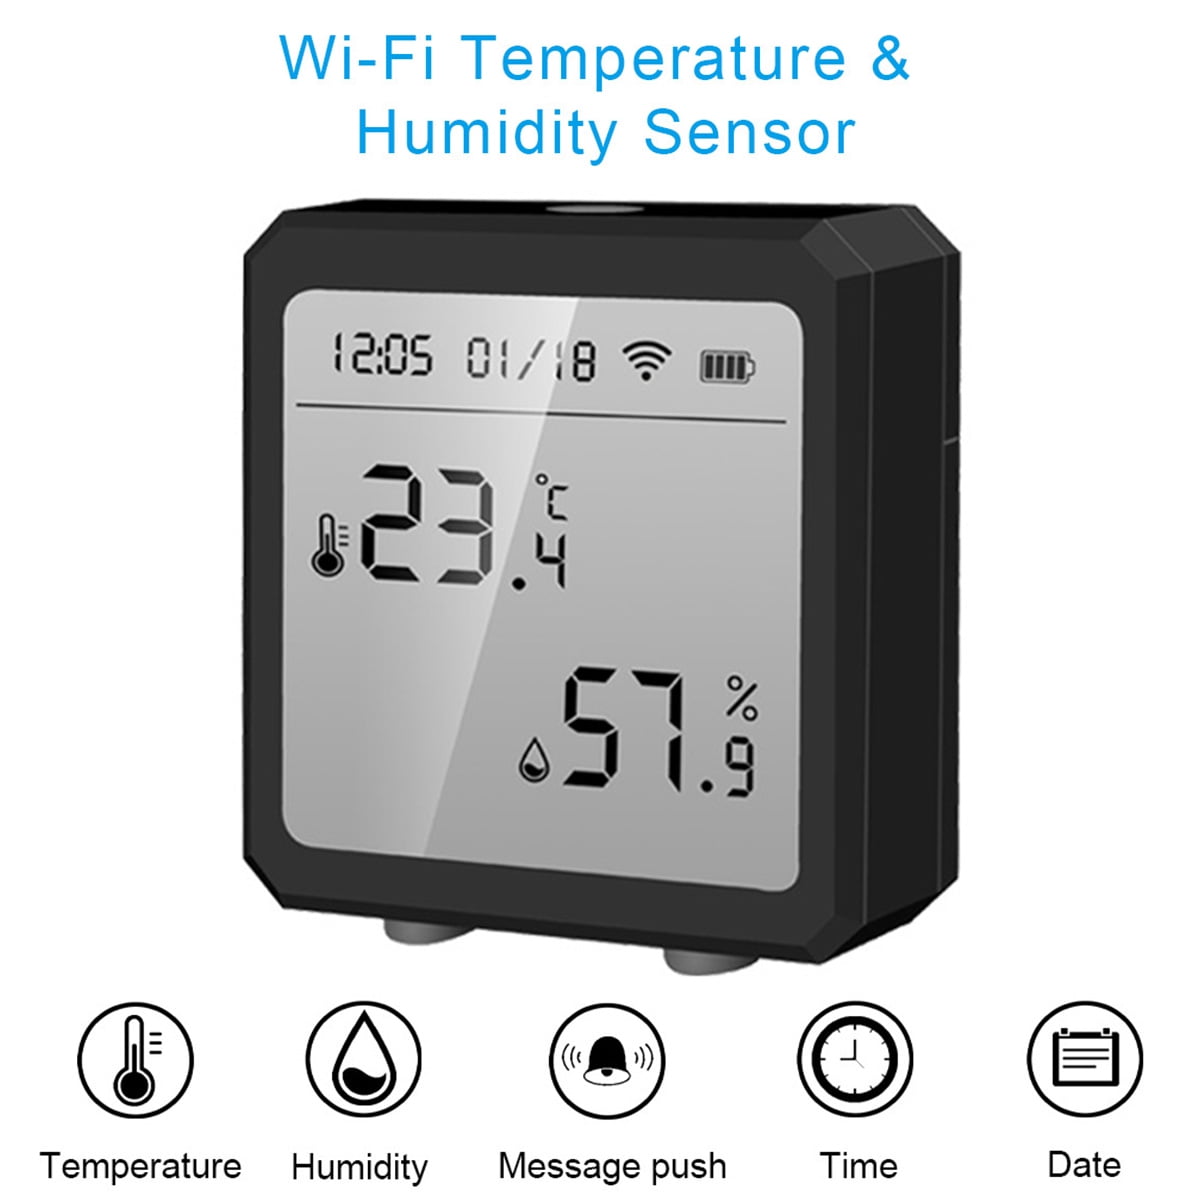 eMylo WiFi Thermometer Hygrometer, WiFi Temperature Humidity Monitor with  App Notification Alert, History Data, Compatible with Alexa Google  Assistant, Remote Monitor for Home Greenhouse Wine Cellar 